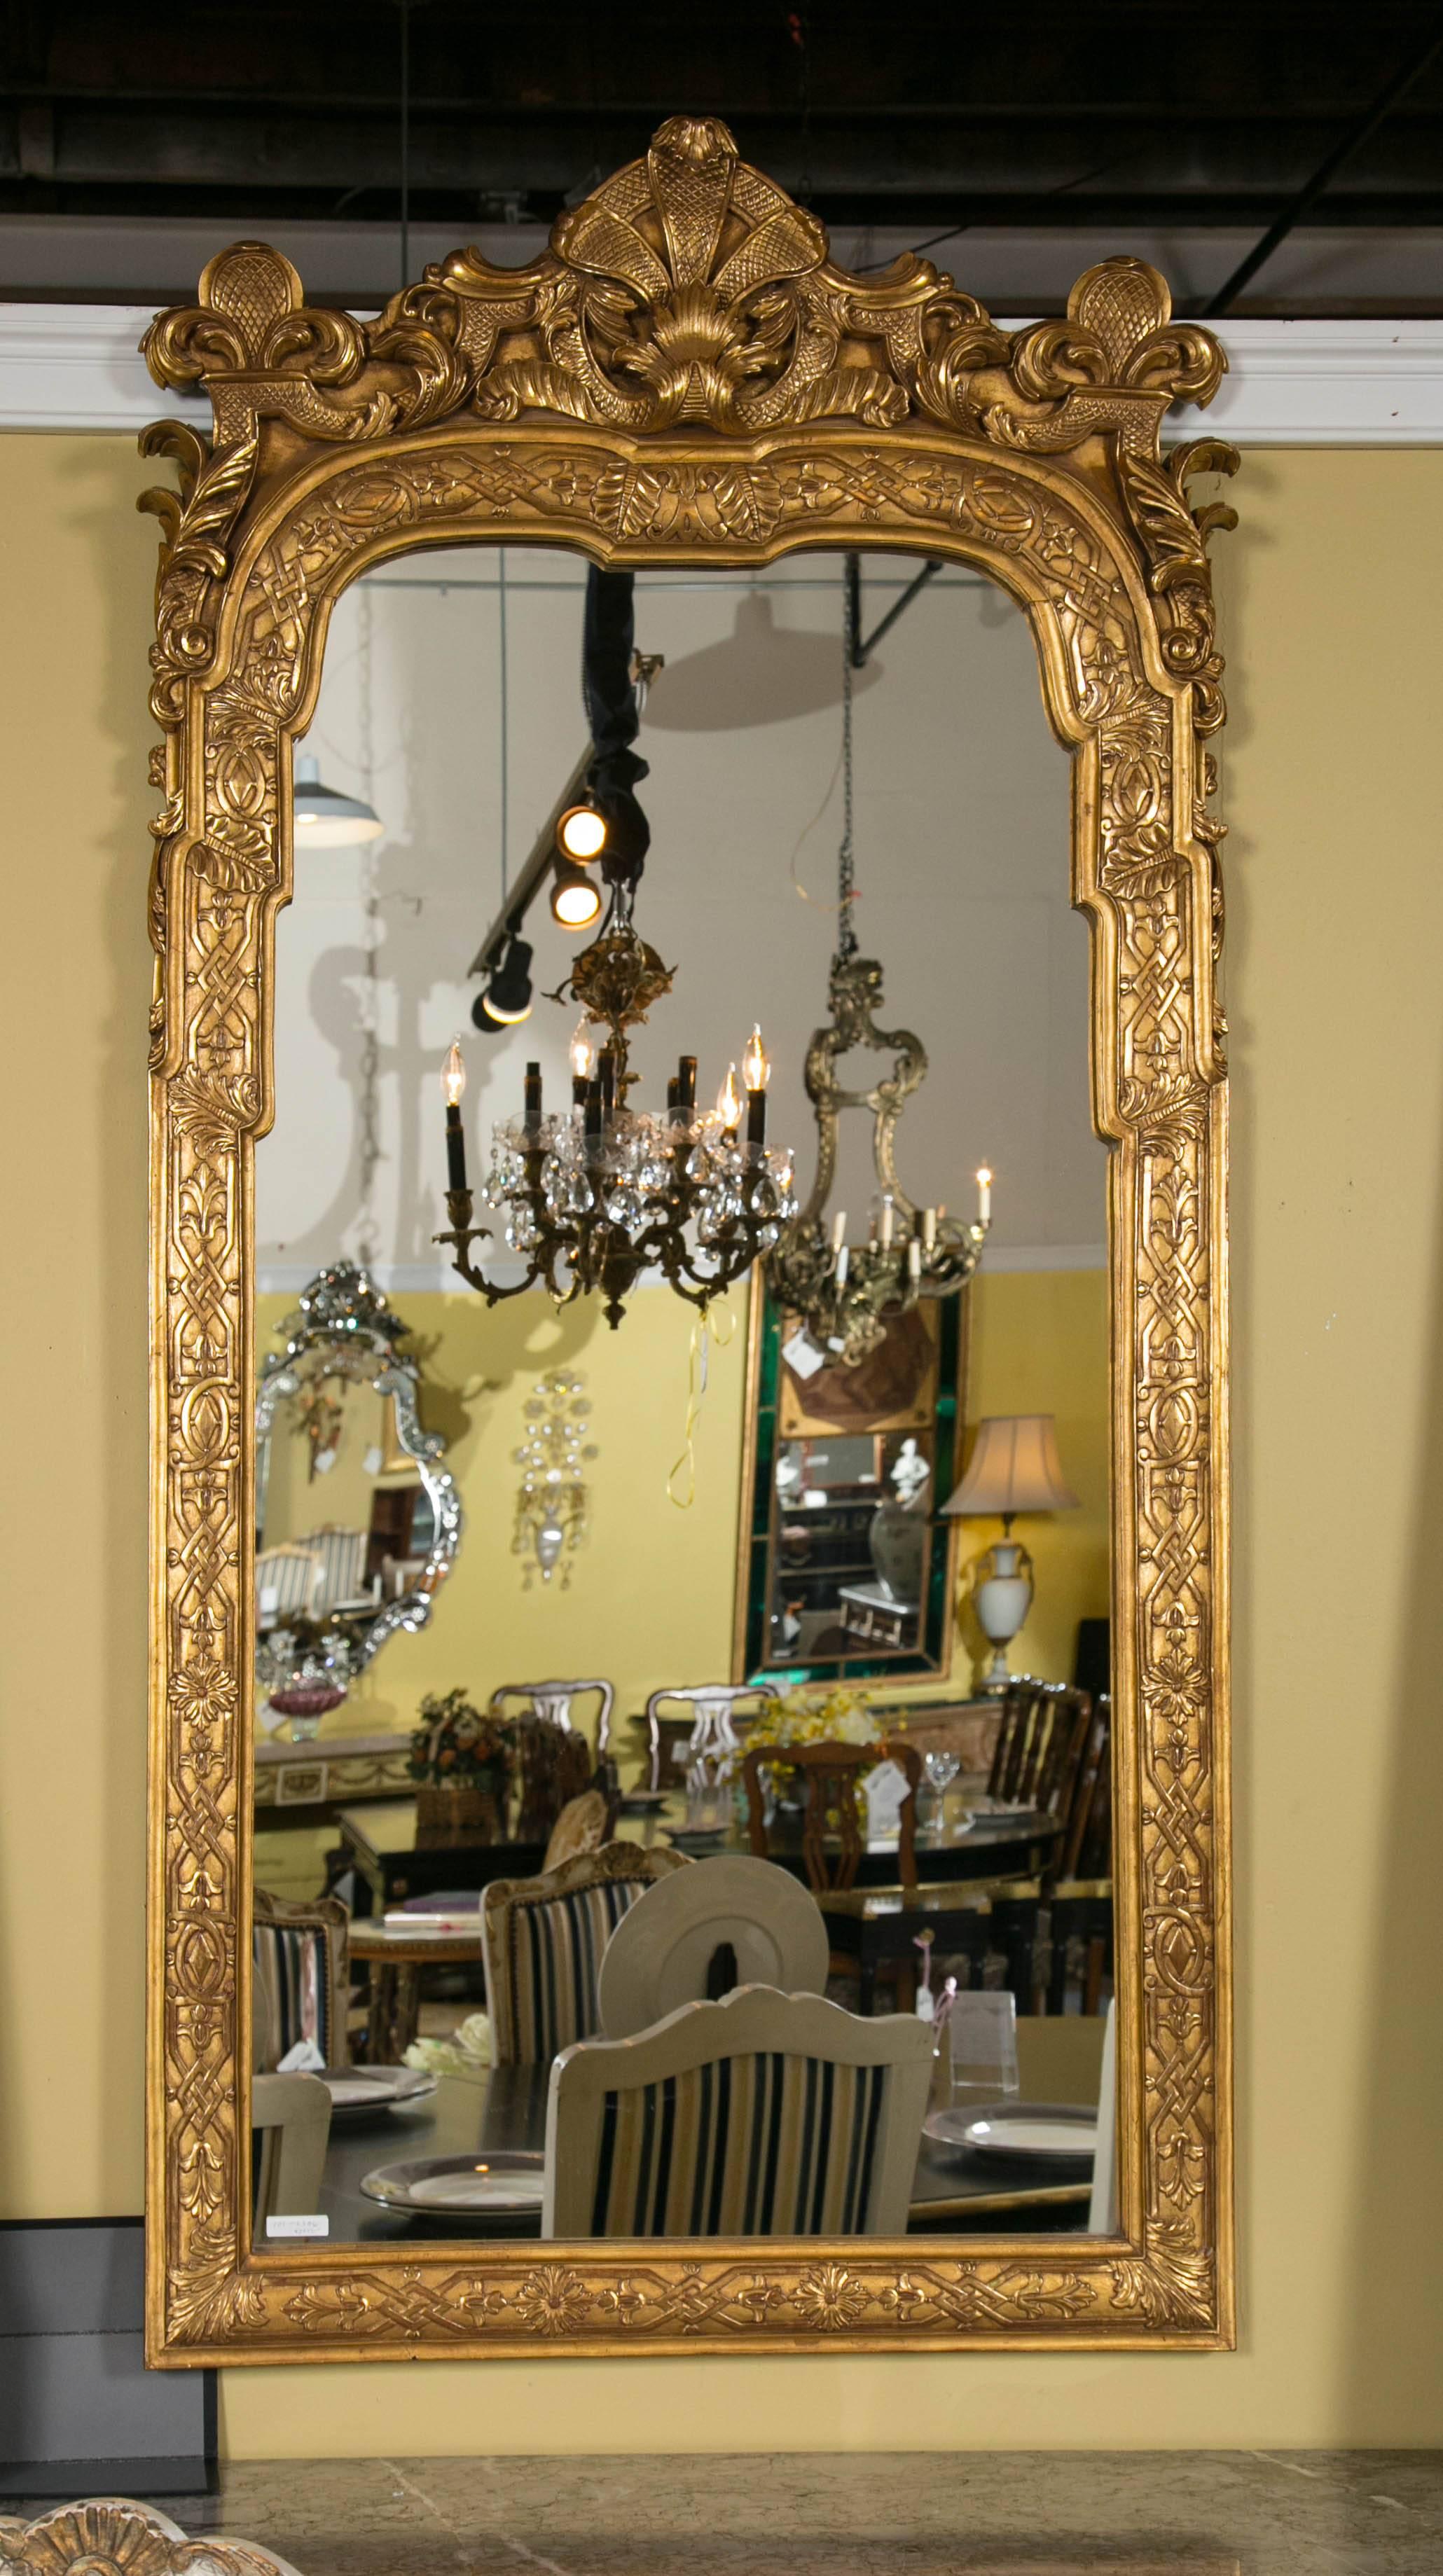 A solid gilt wooden wall or console mirror. The rectangular solid wooden frame having carved roses, leafs and vine design in a fine clay under gilt finish. This Louis XV style frame would look beautiful in any area over any console or sideboard.